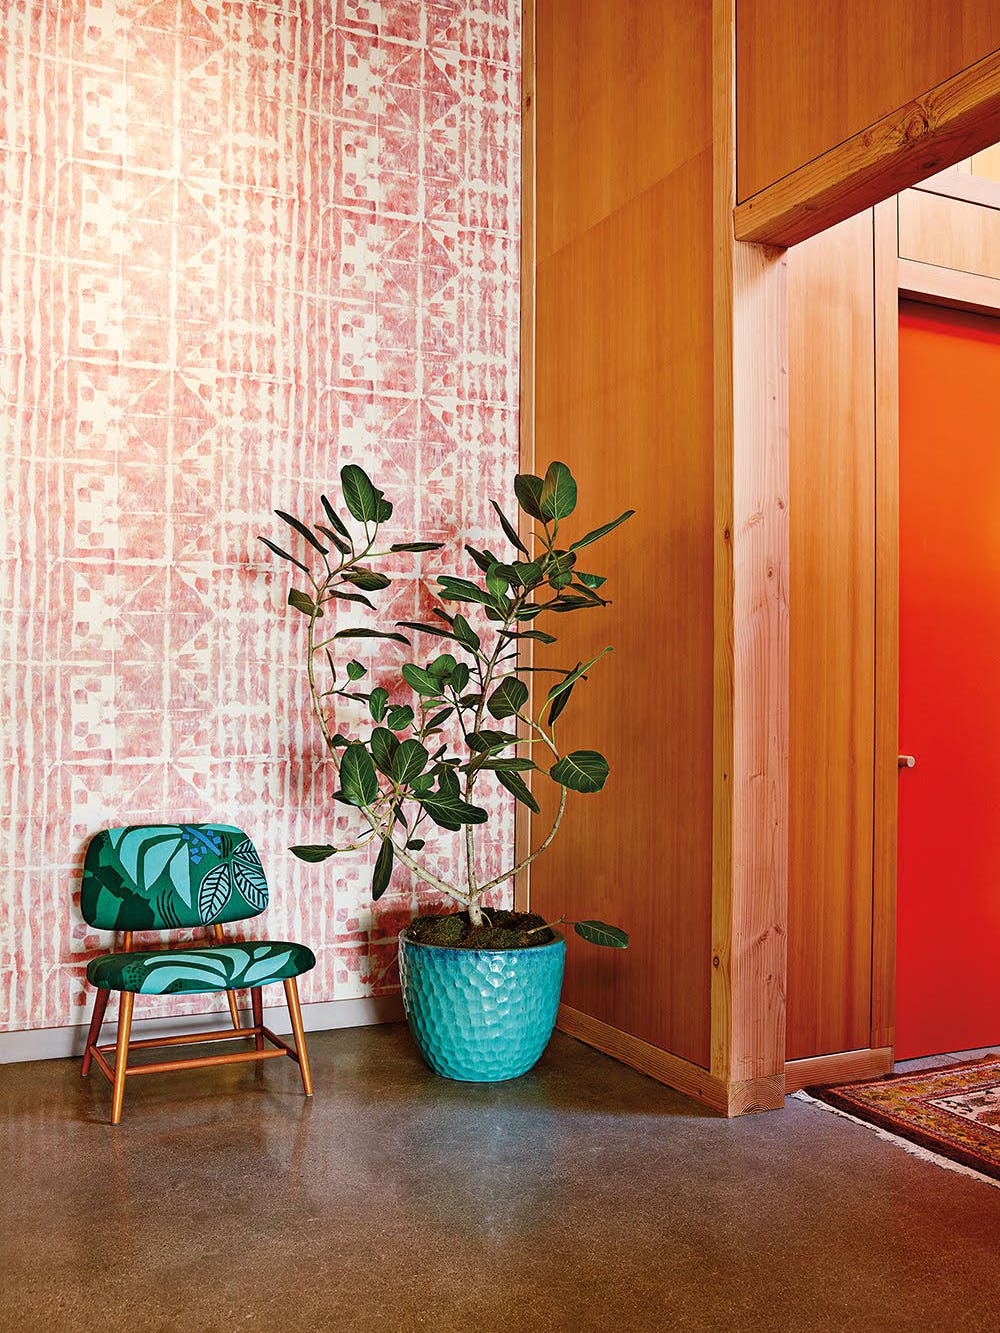 orange wallpaper with plant and chair in front of it